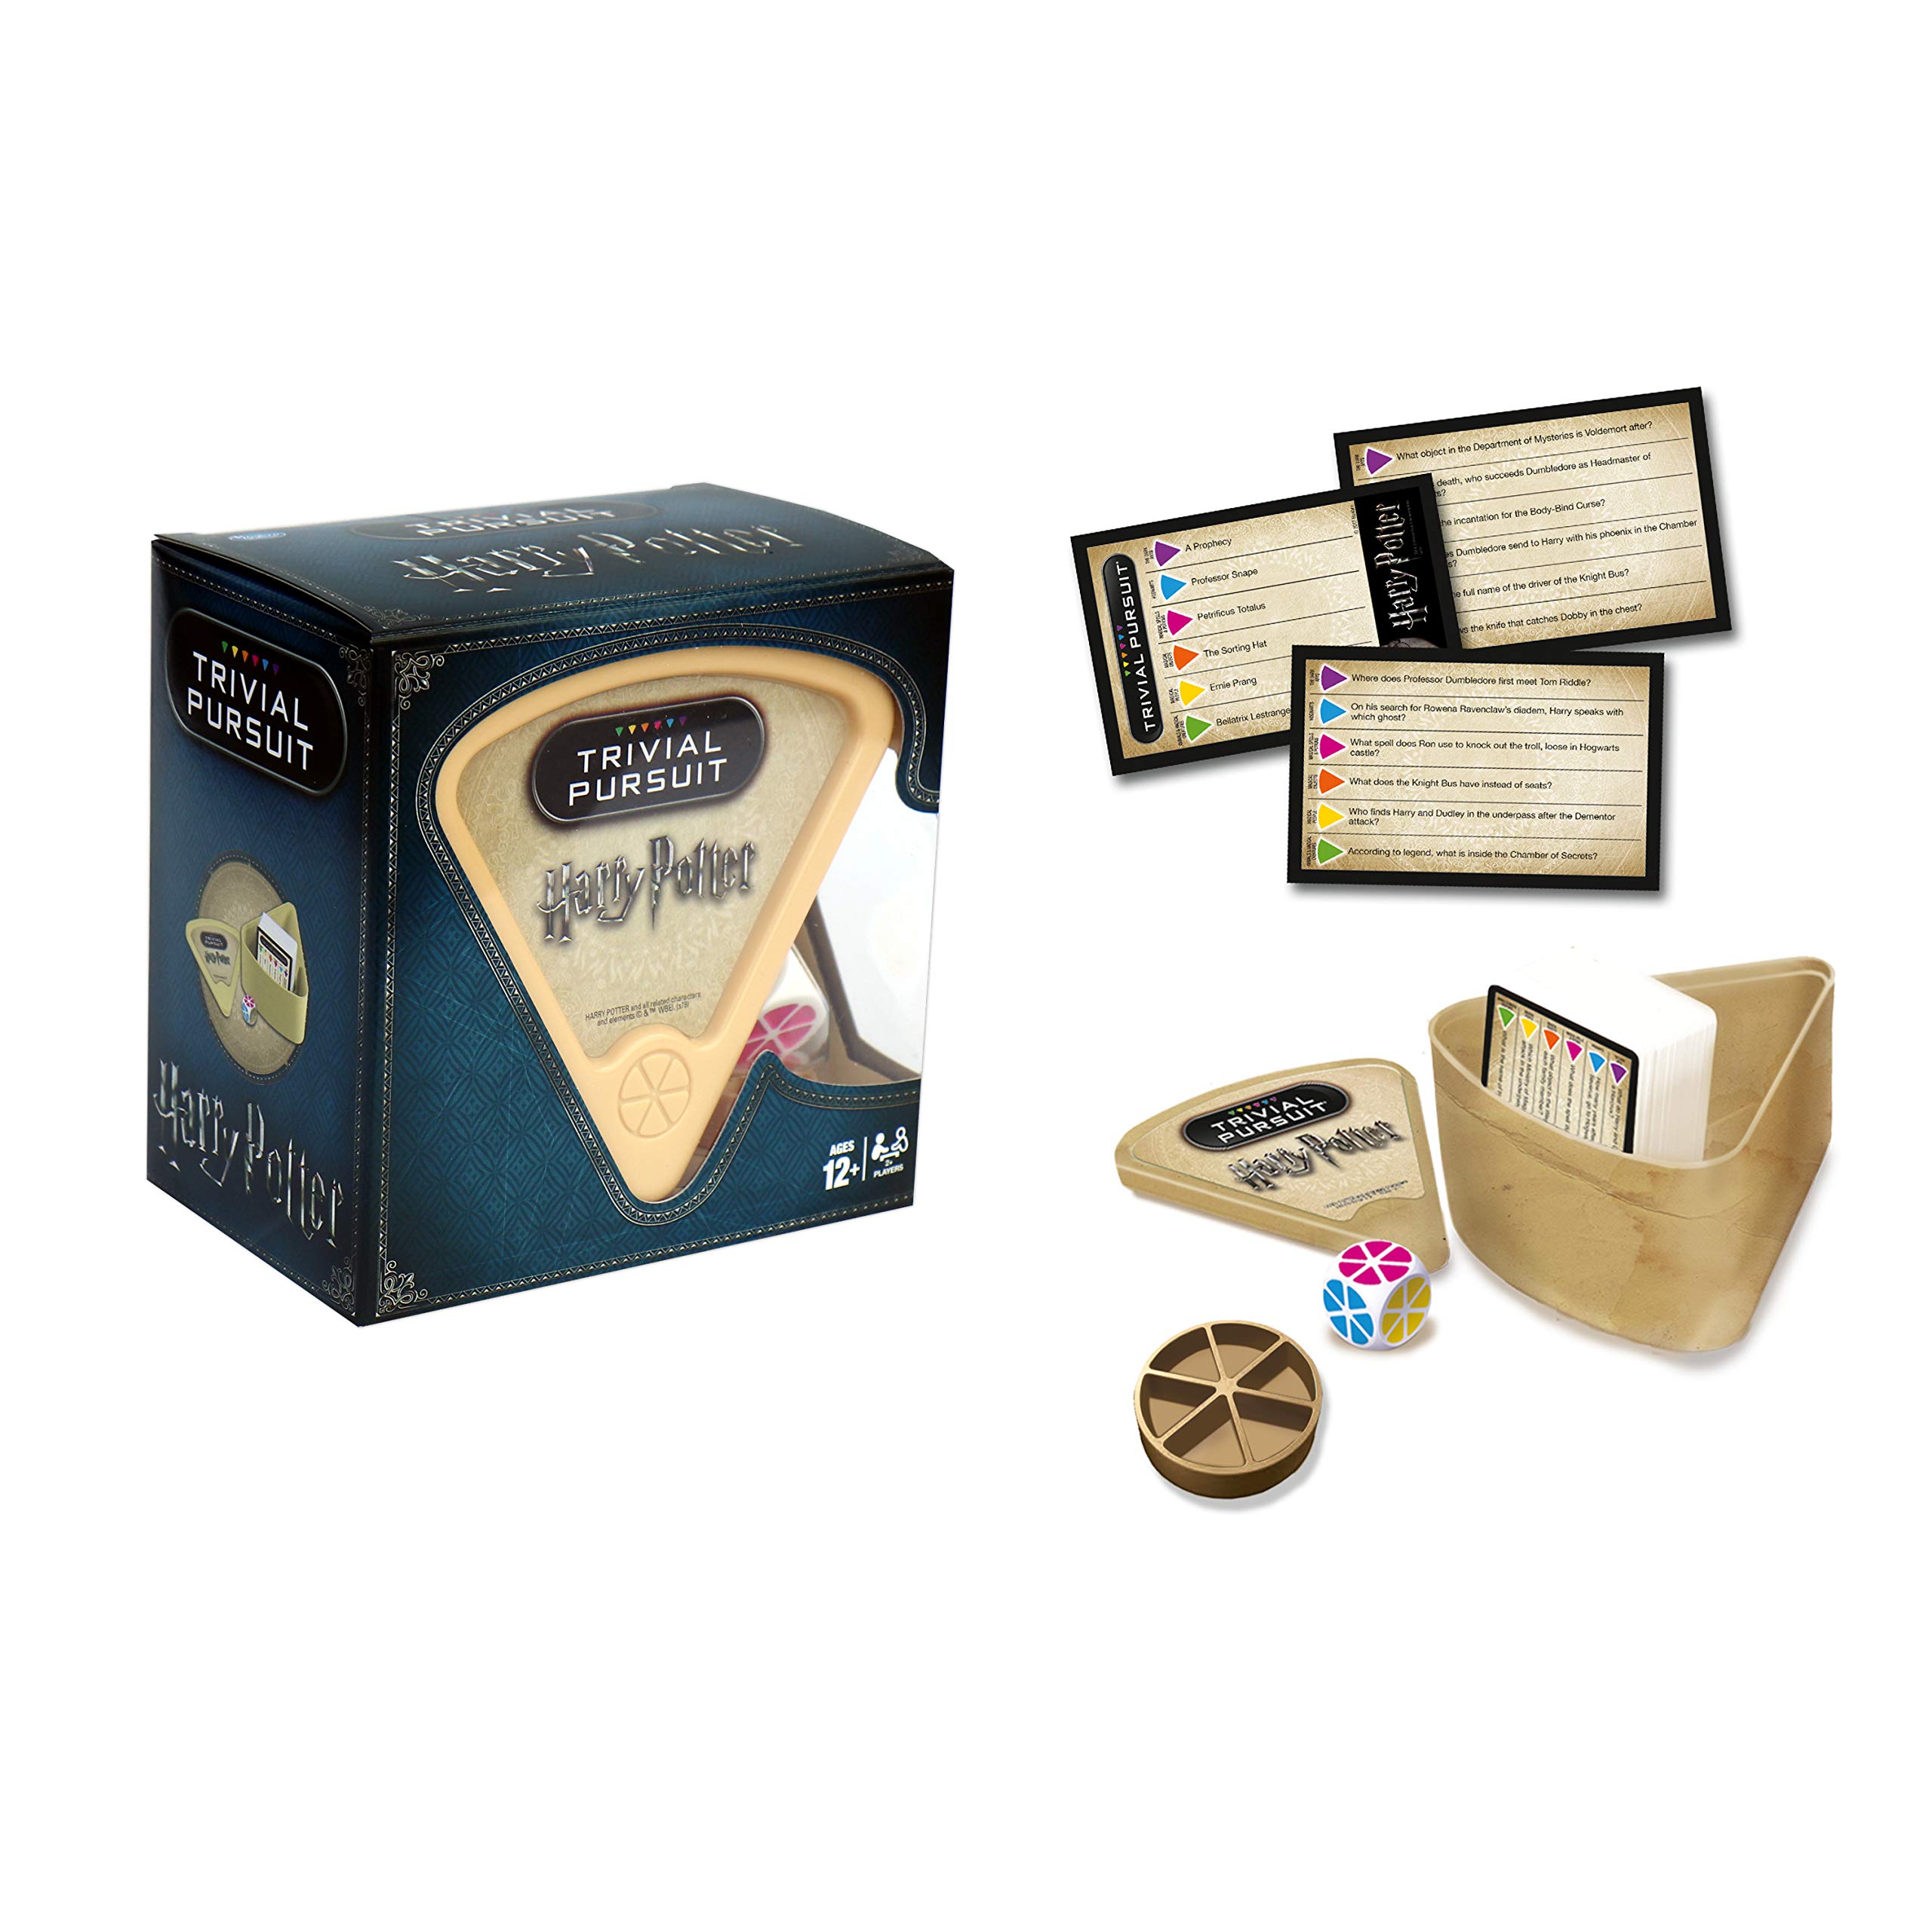 Hasbro Gaming Harry Potter Trivial Pursuit Game